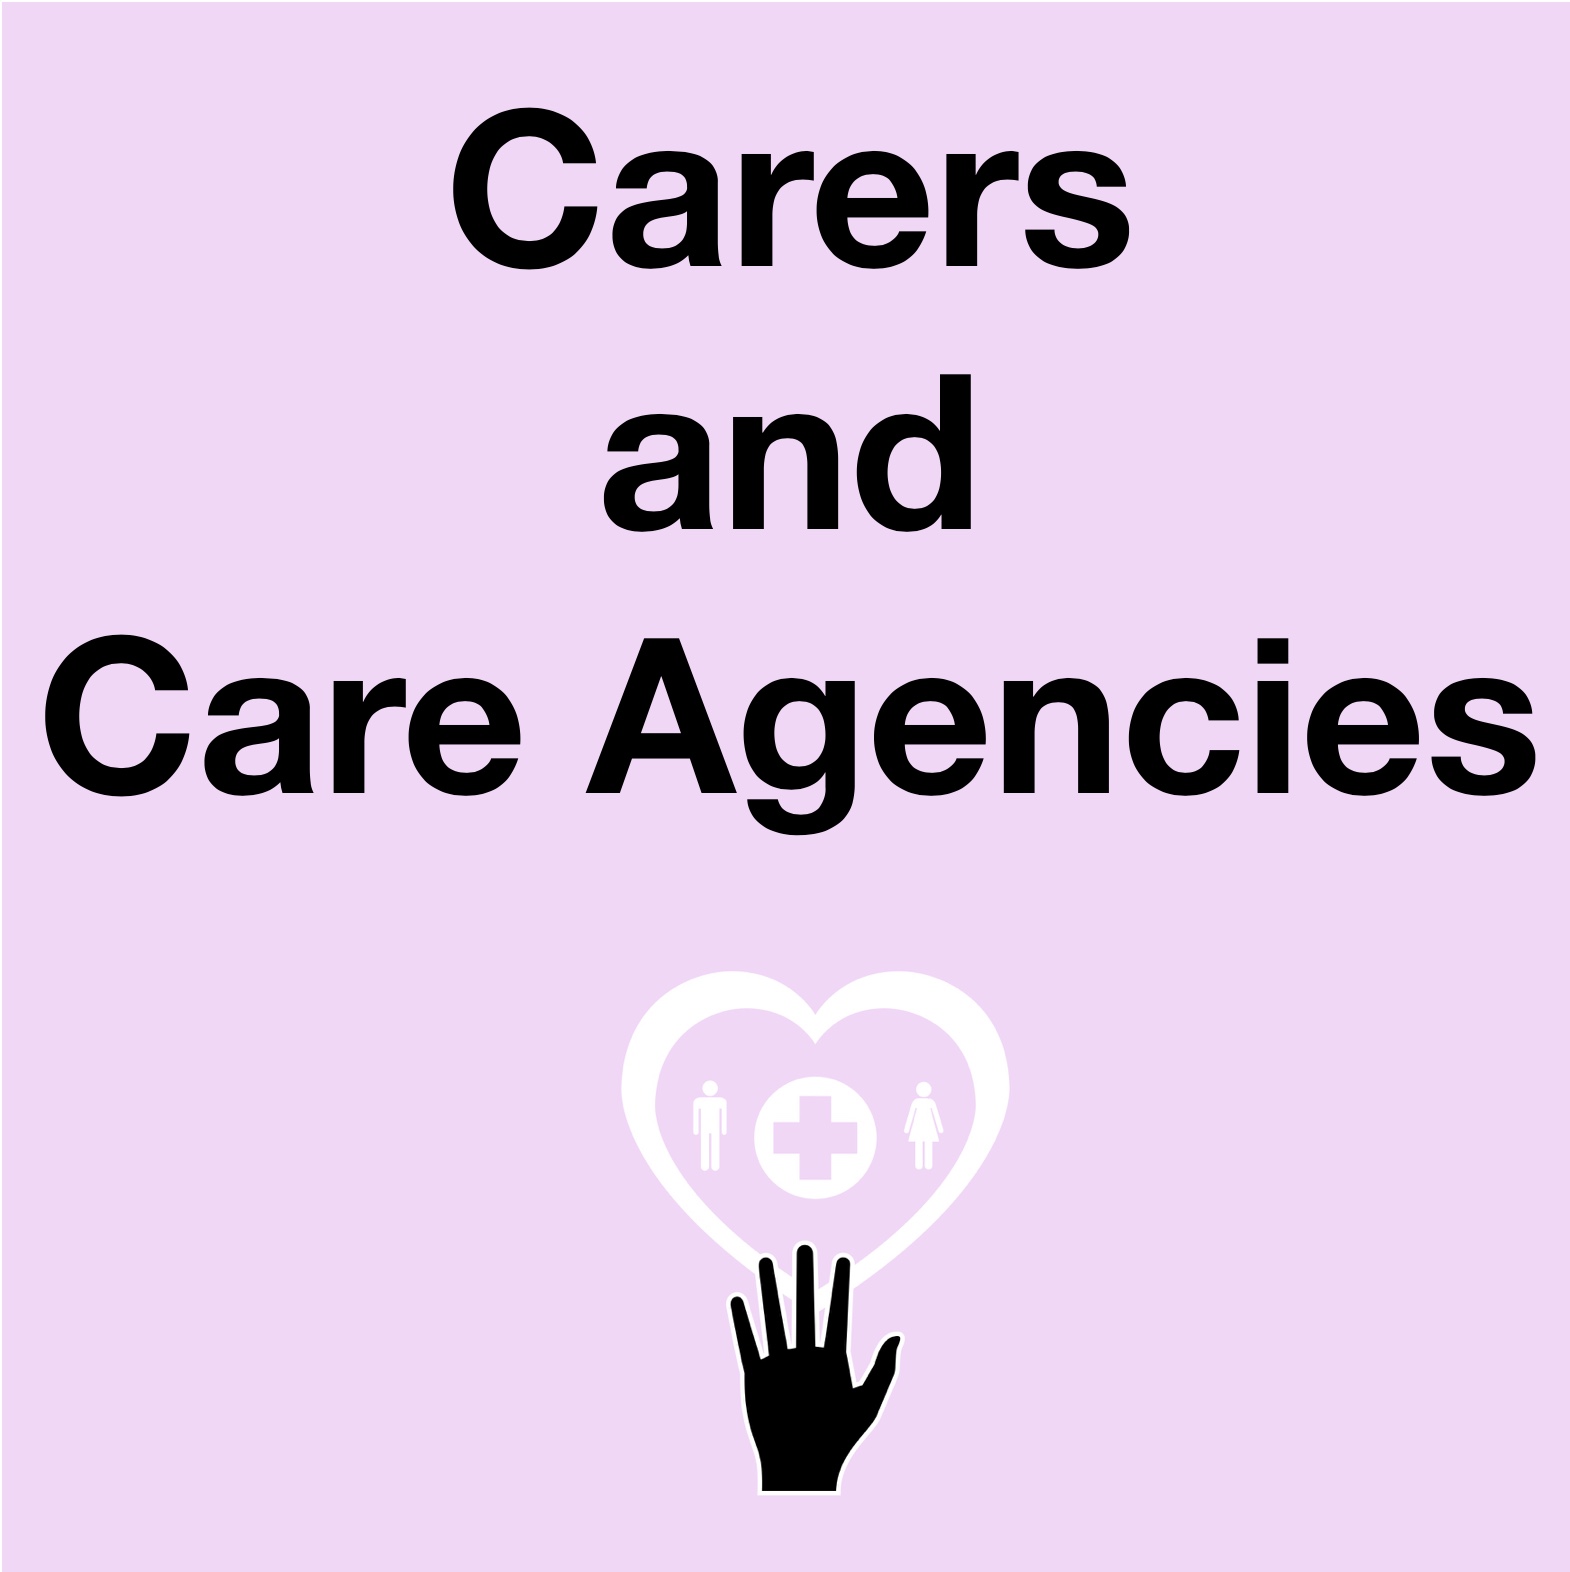 Carers and Care Agencies